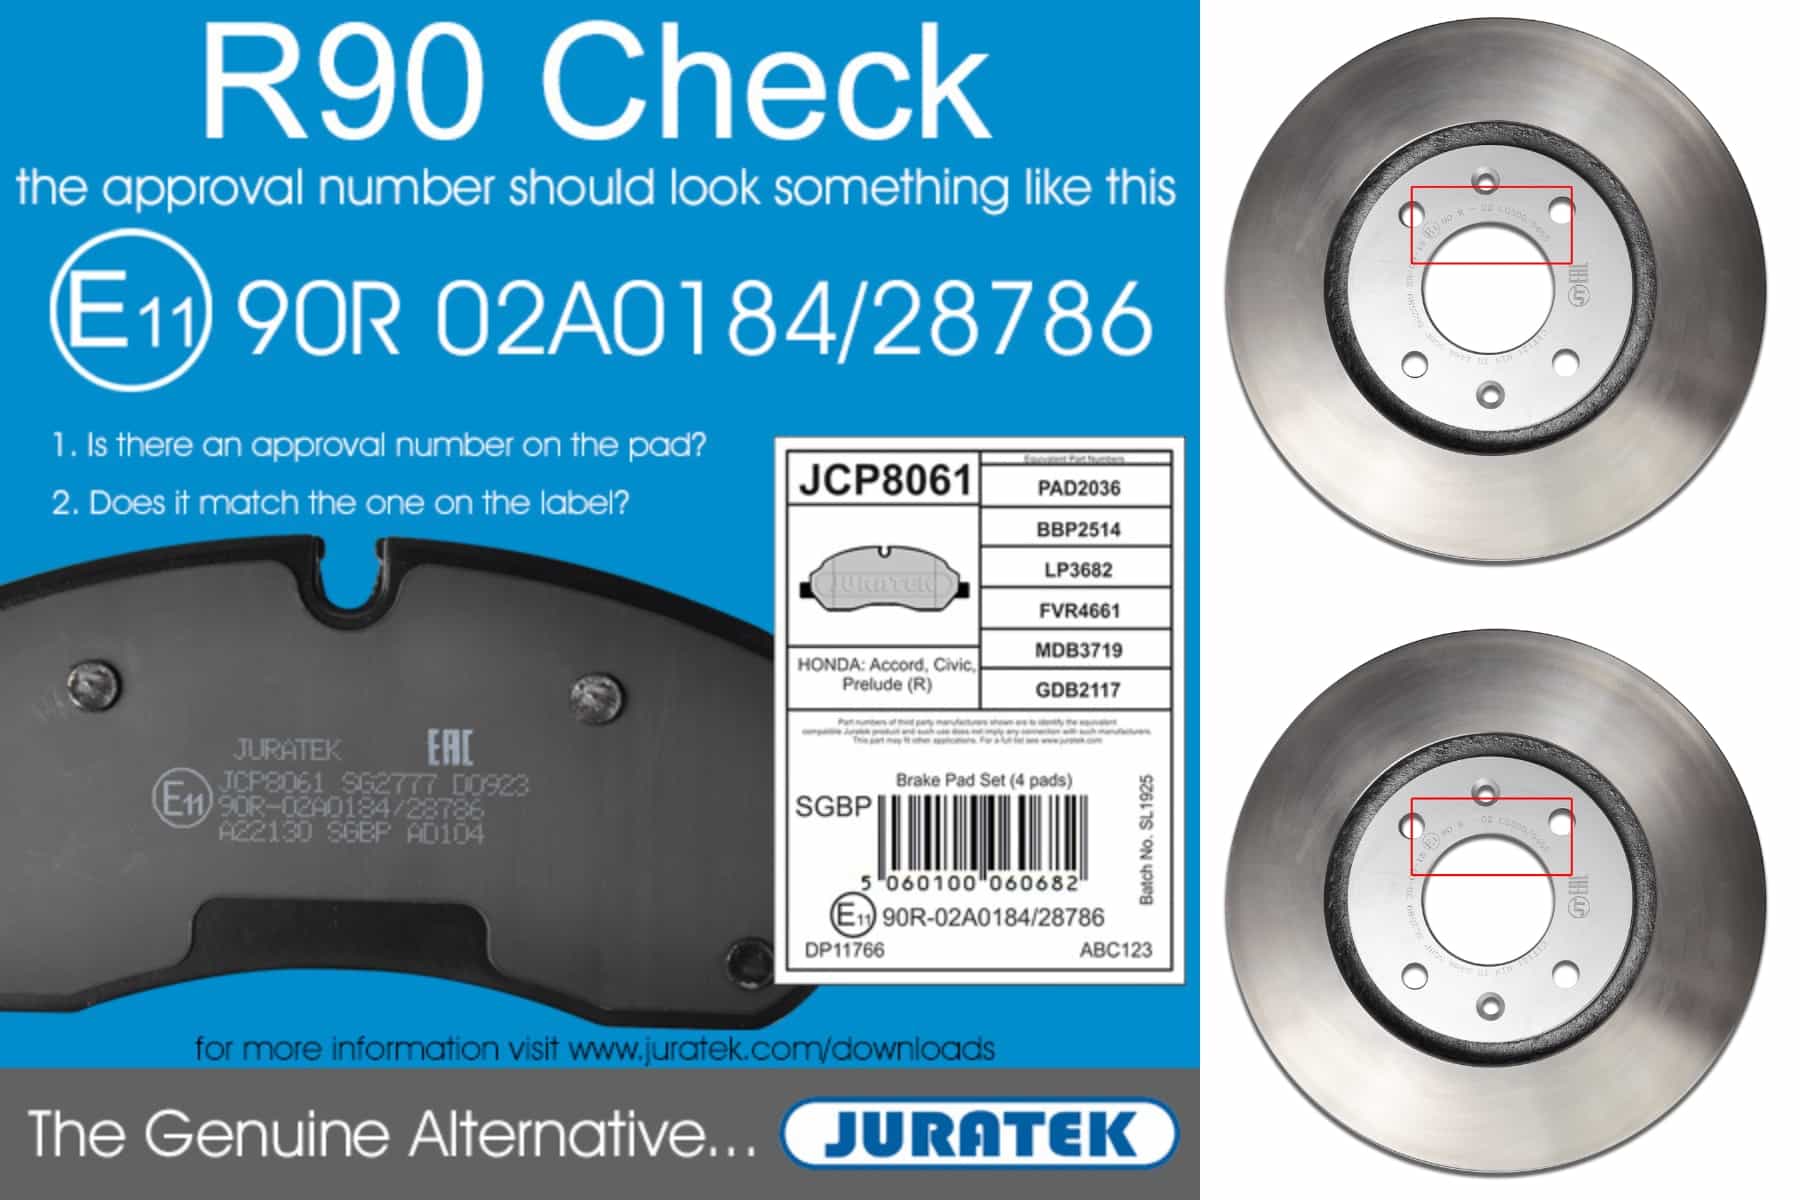 Juratek discusses the importance of R90 compliance